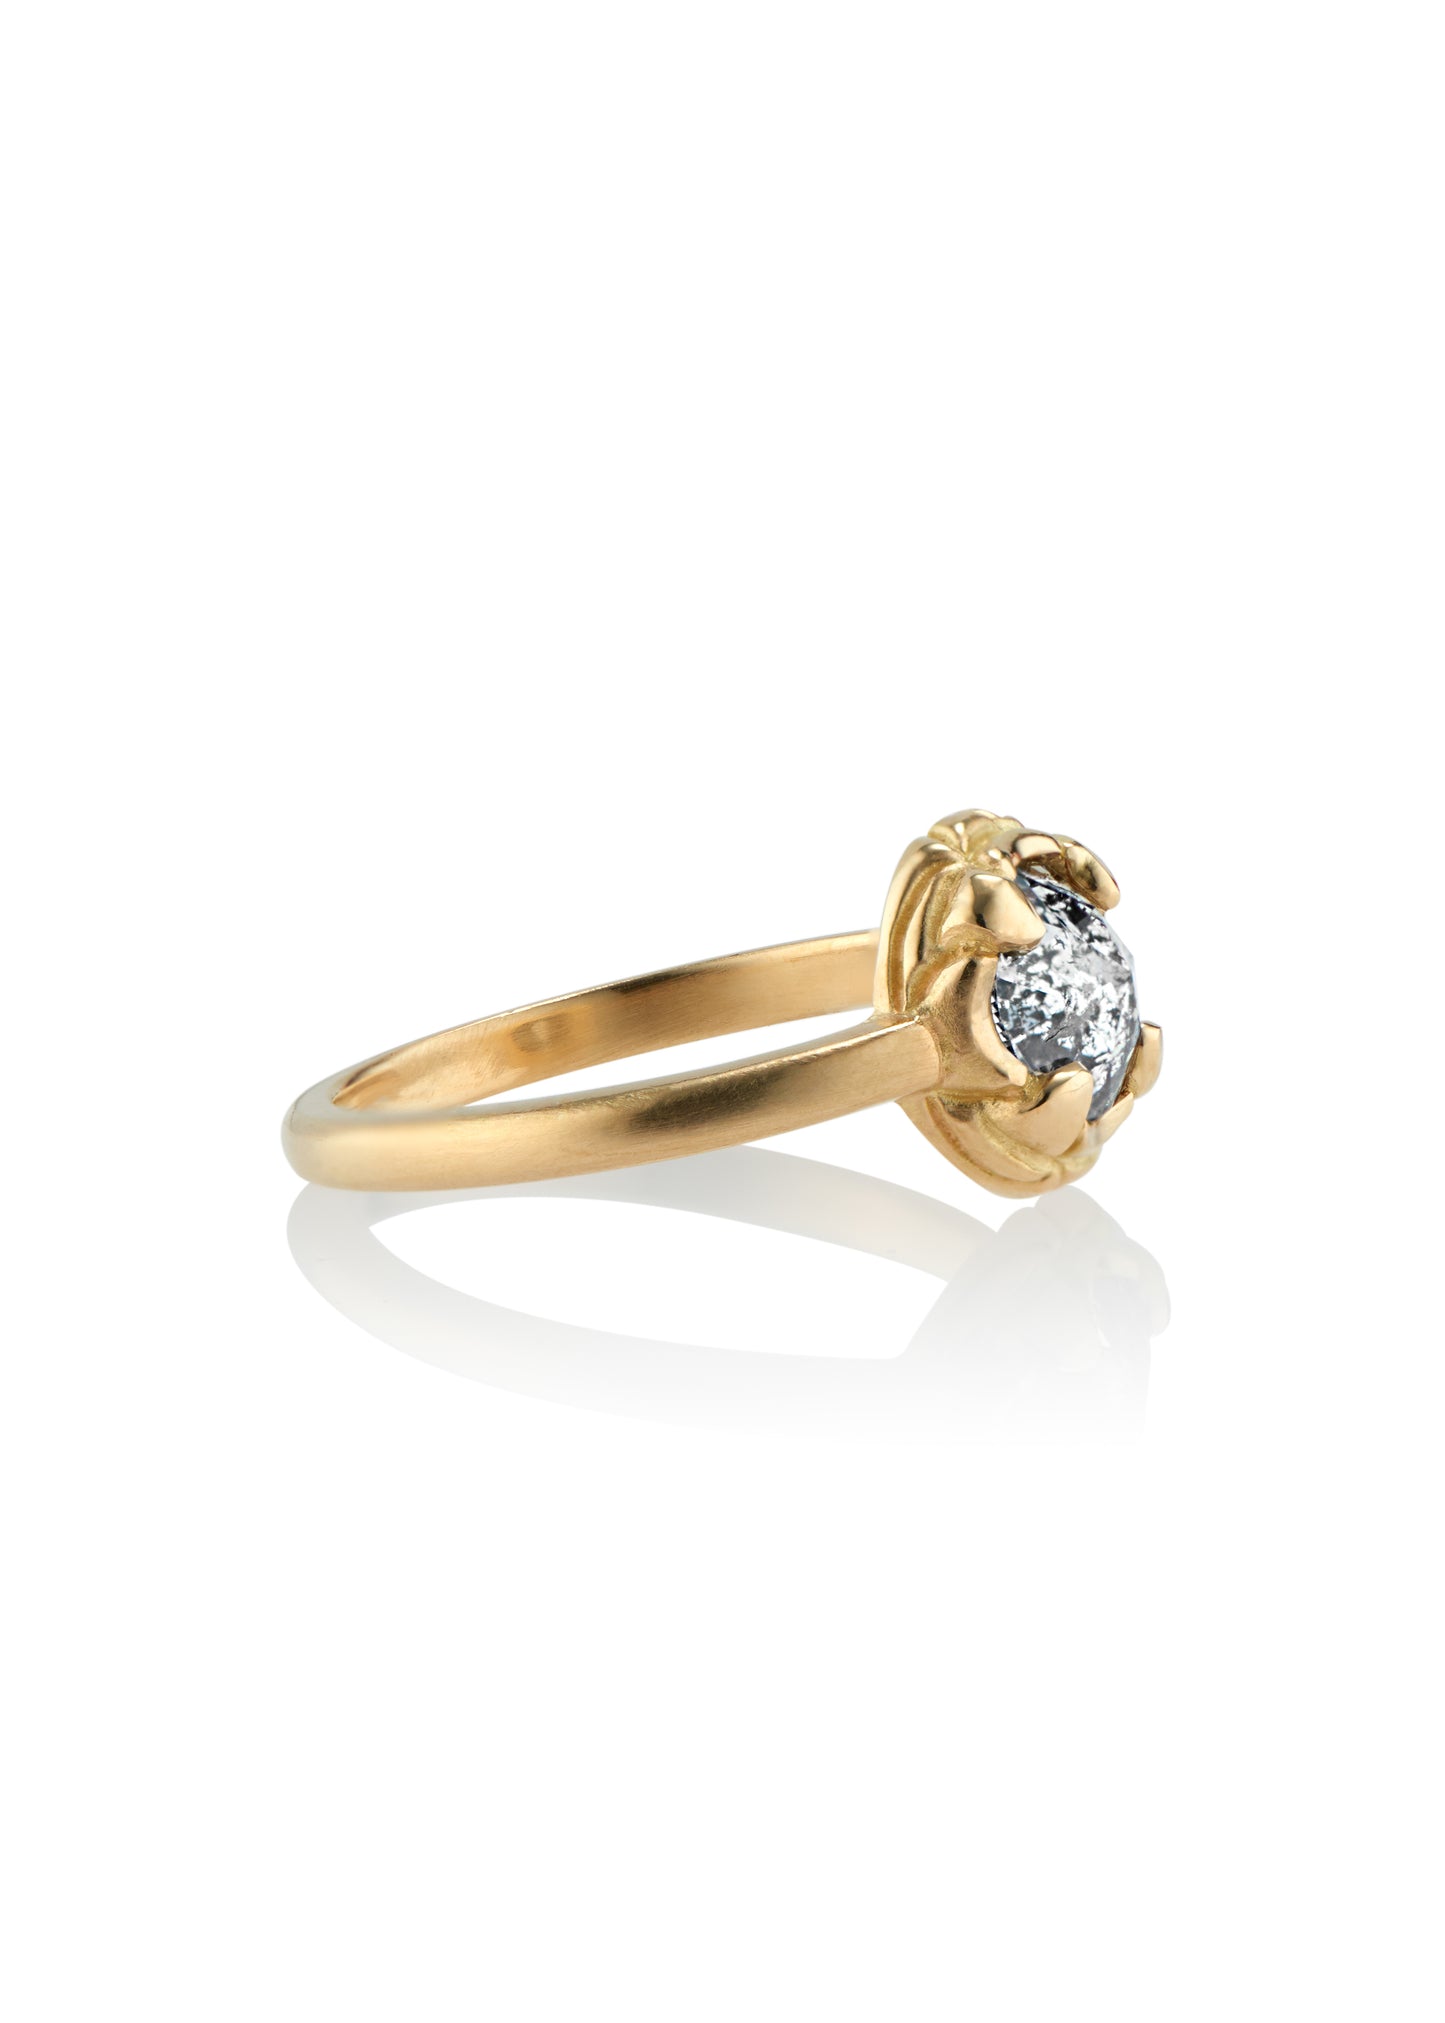 Named for Empress Josephine, this ring pairs perfectly with the Empress nesting band. Still stunning on its own, this ring features a rose cut diamond set securely within four prongs— a minimalist setting that marries a modern aesthetic with echoes of the past. 